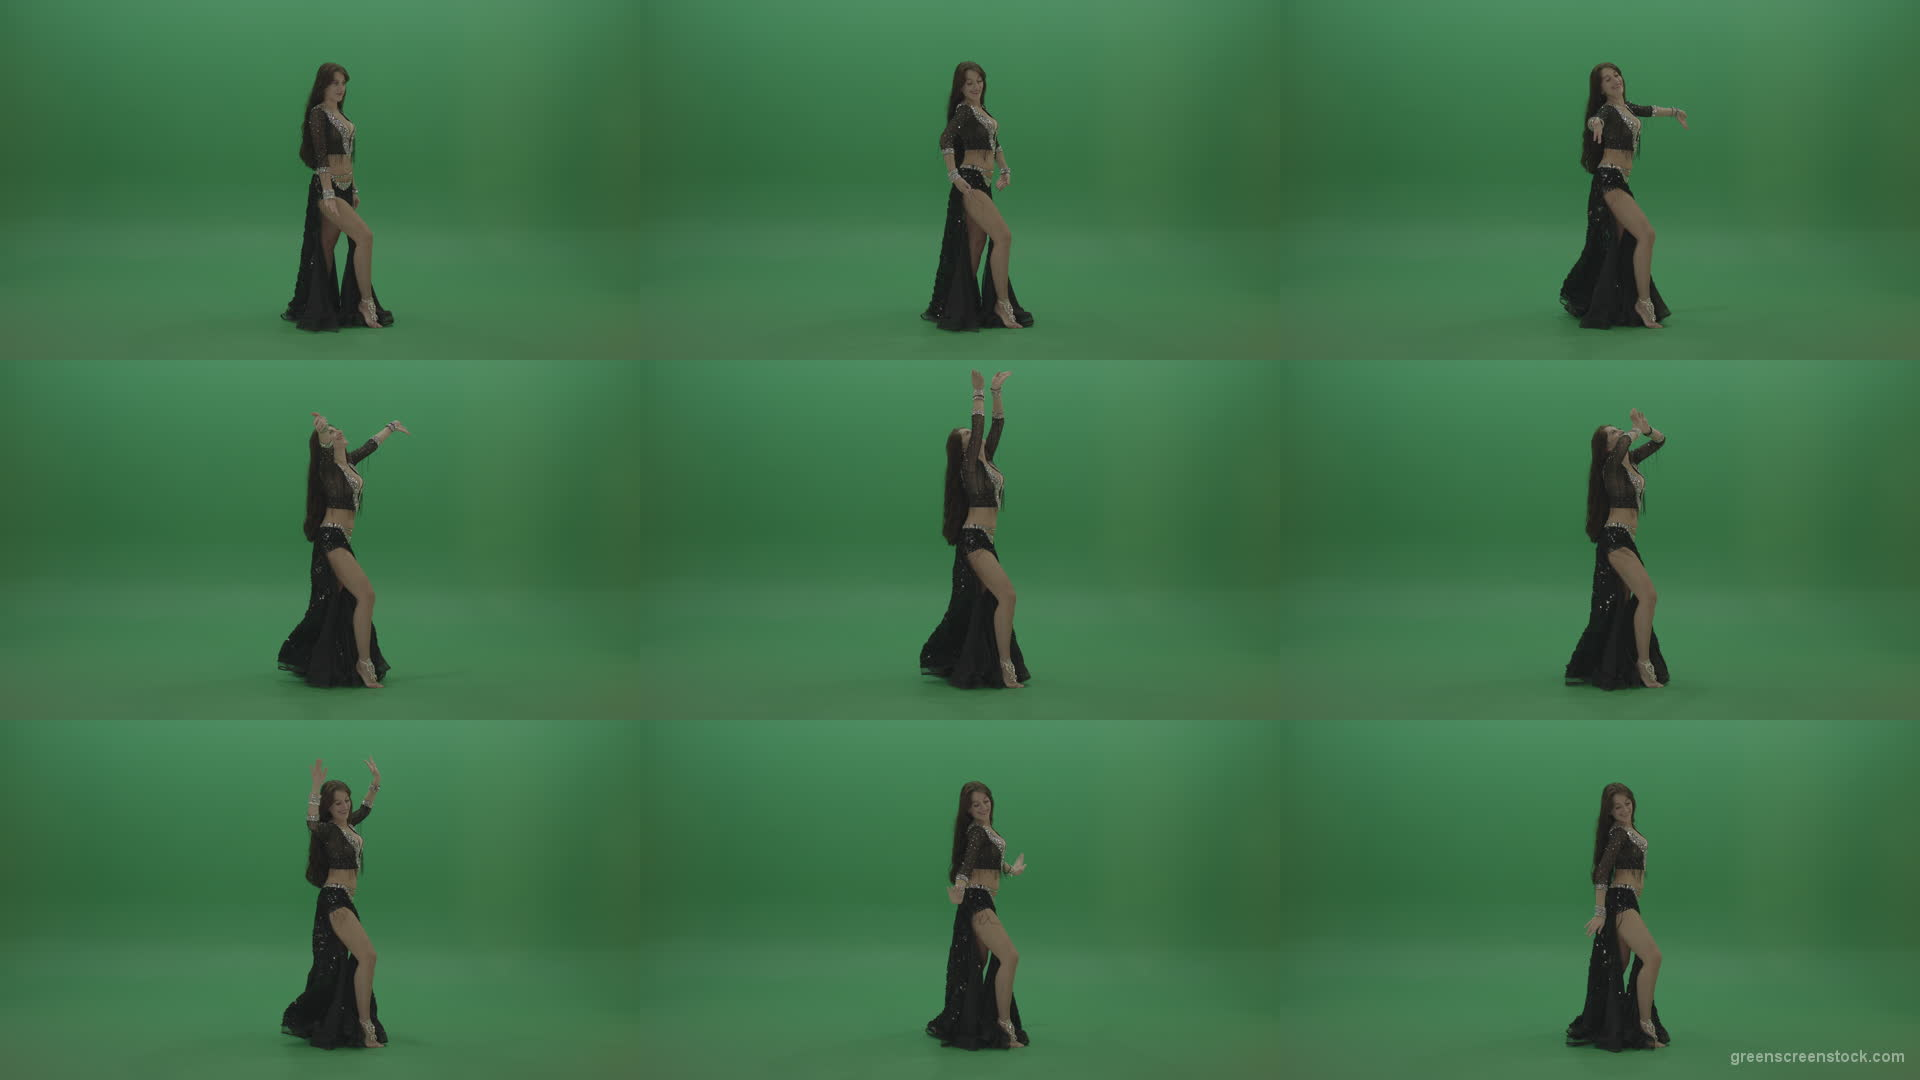 Gorgeous-belly-dancer-in-black-wear-display-amazing-dance-moves-over-chromakey-background Green Screen Stock